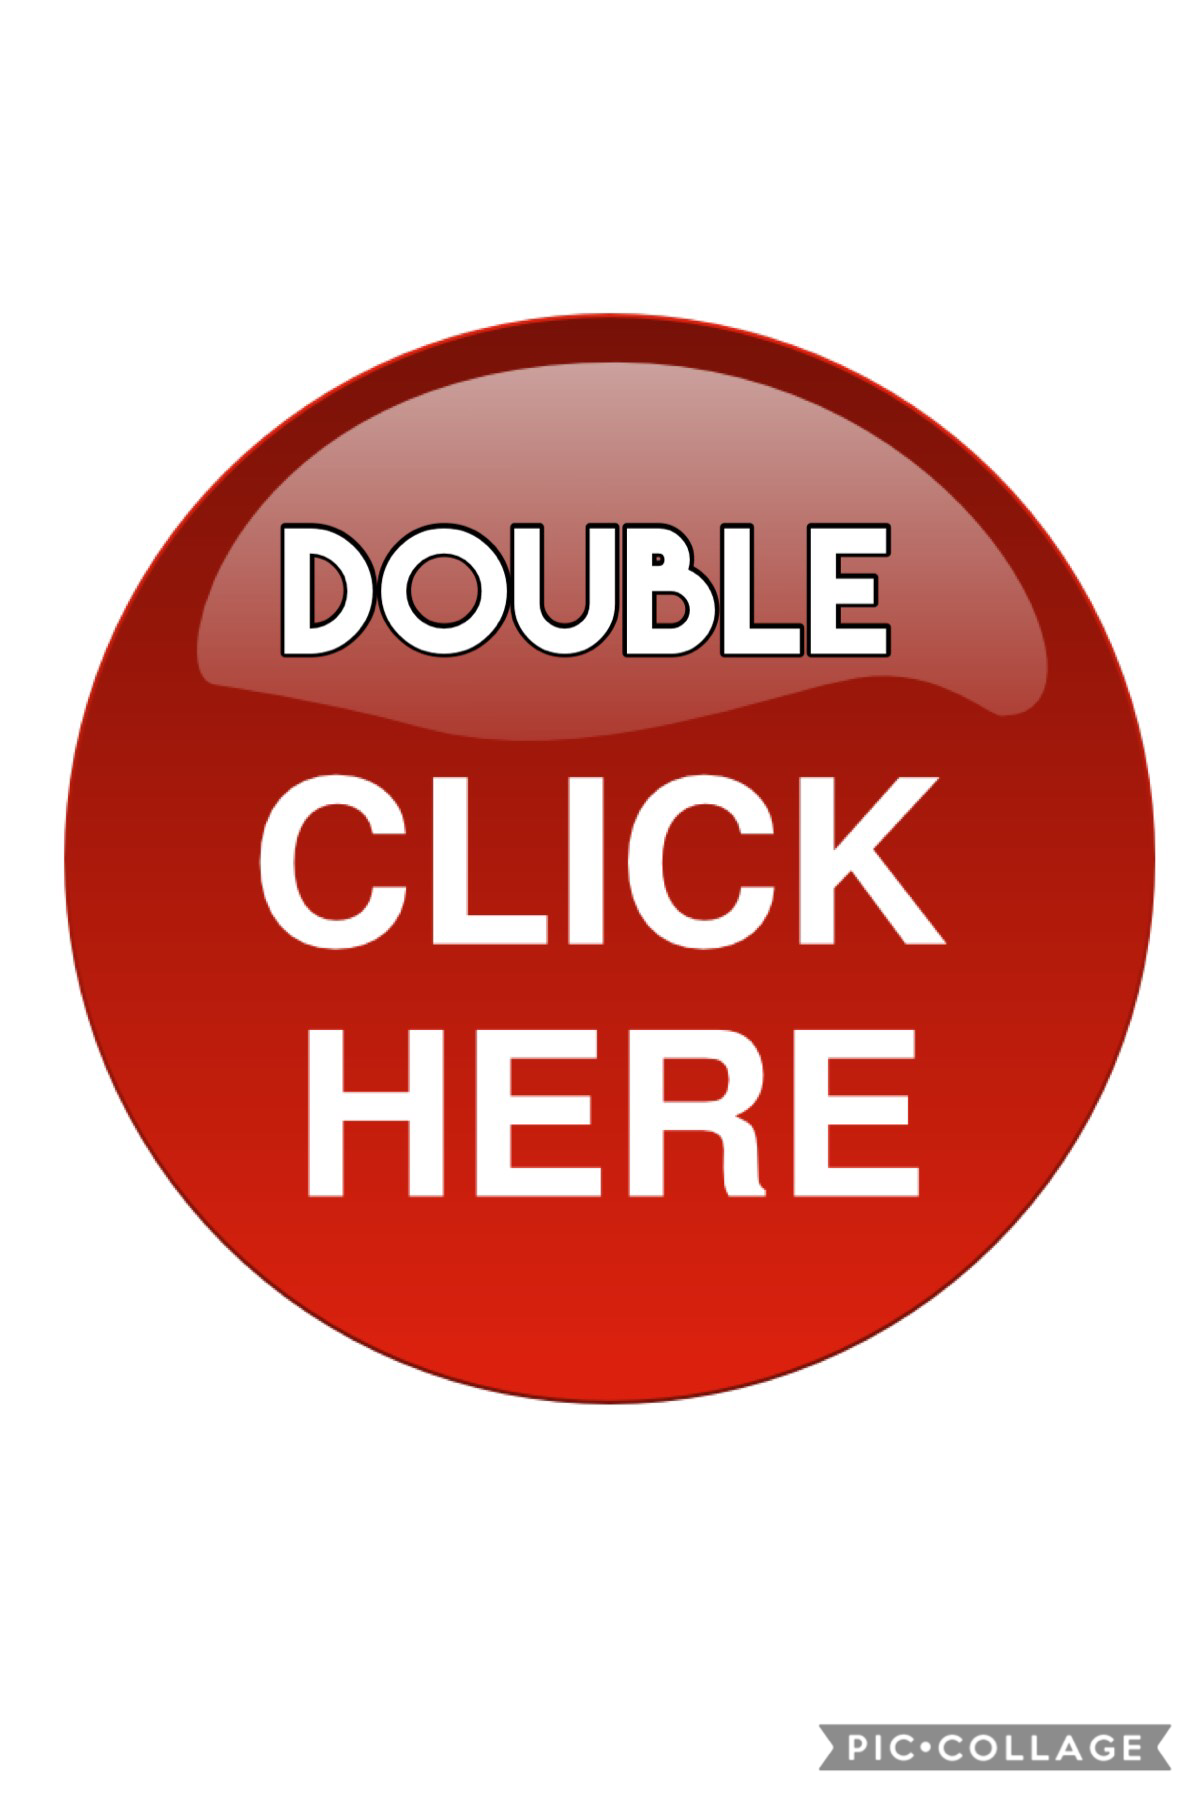 Double click here